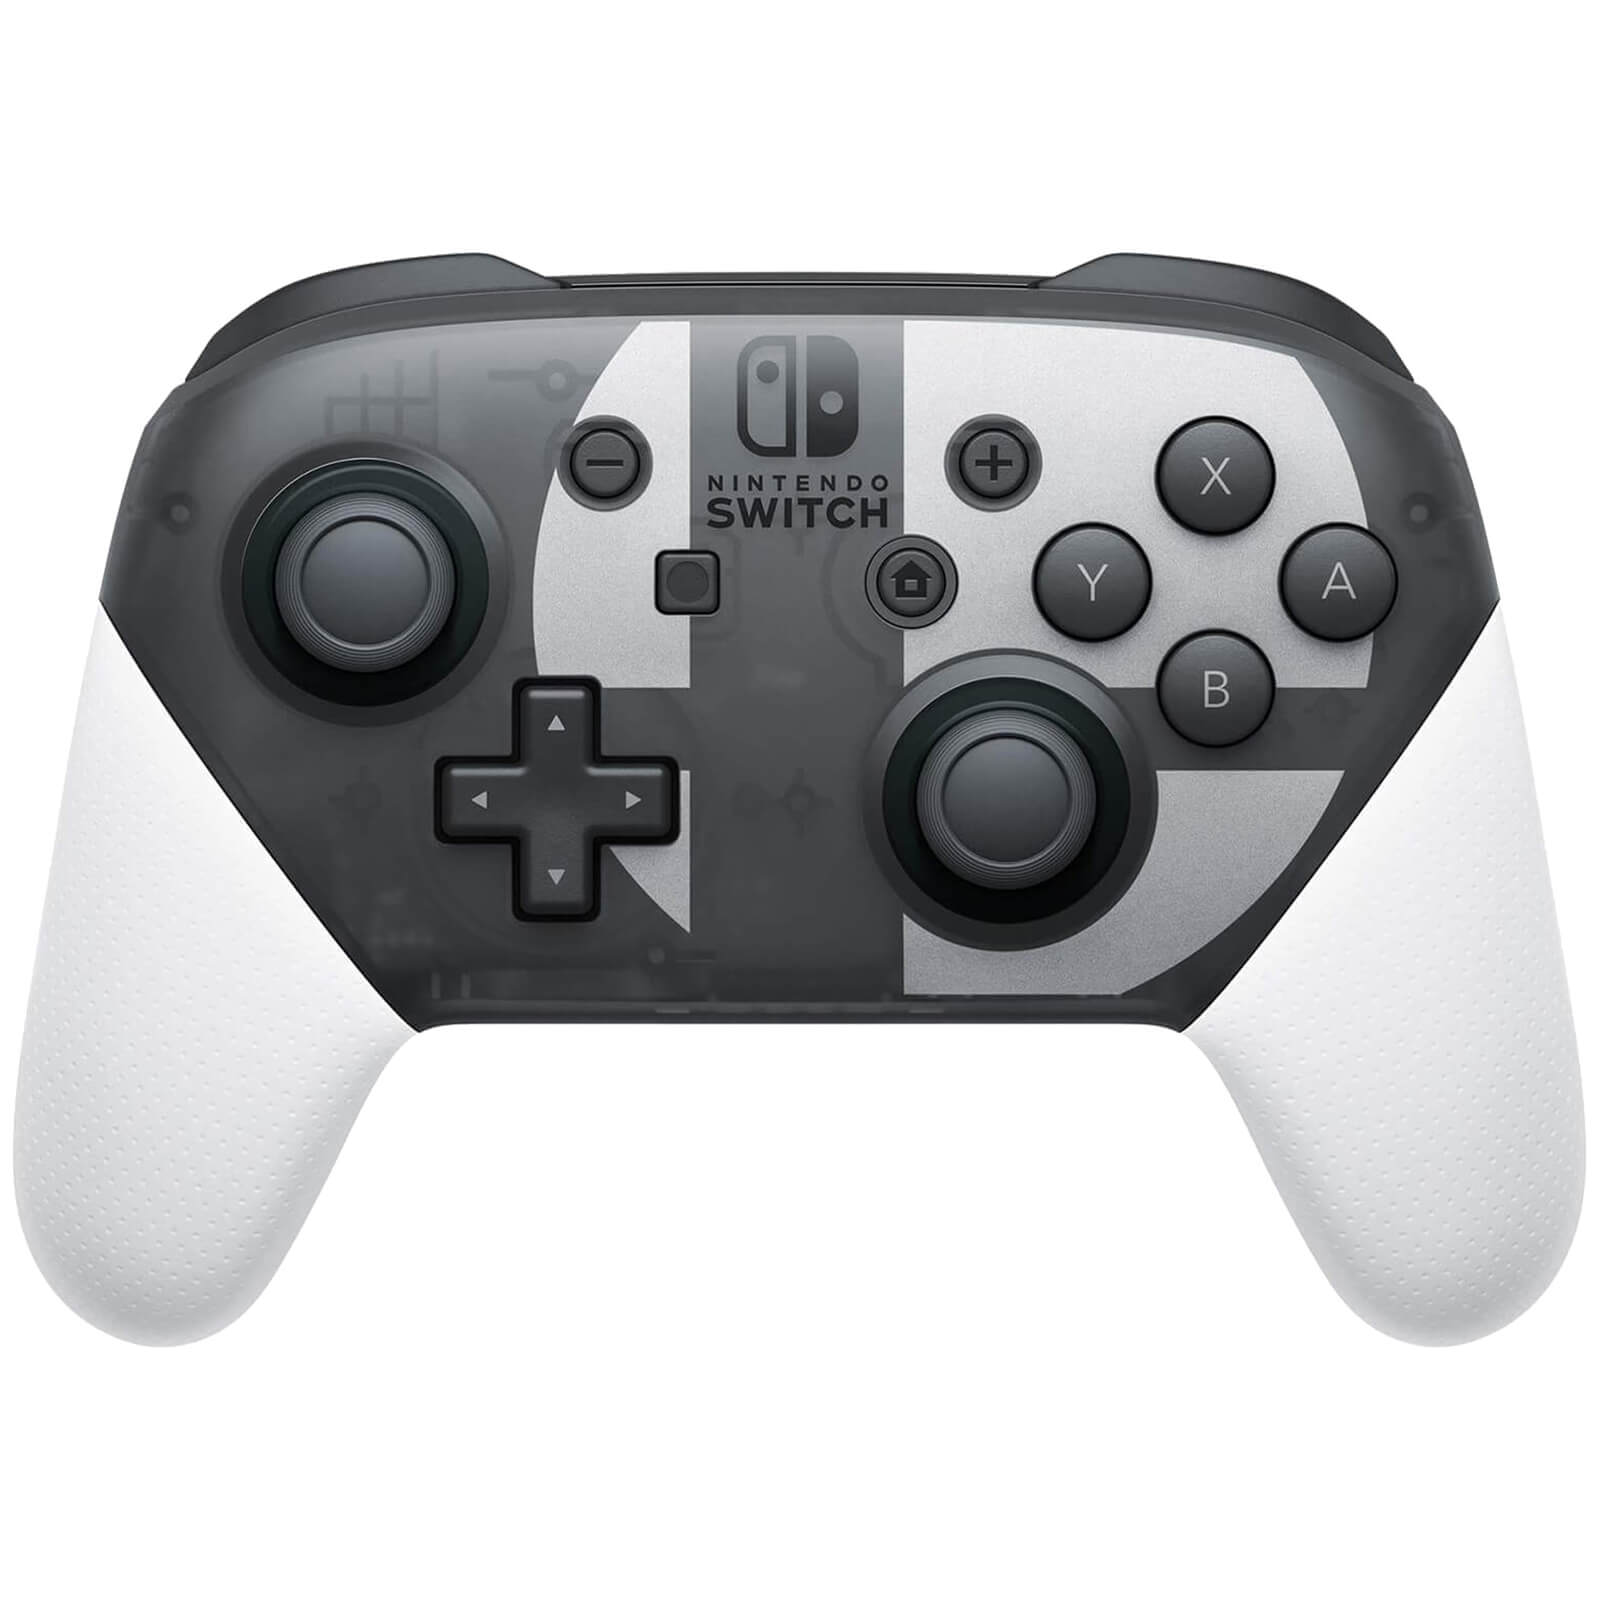 set up pro controller switch